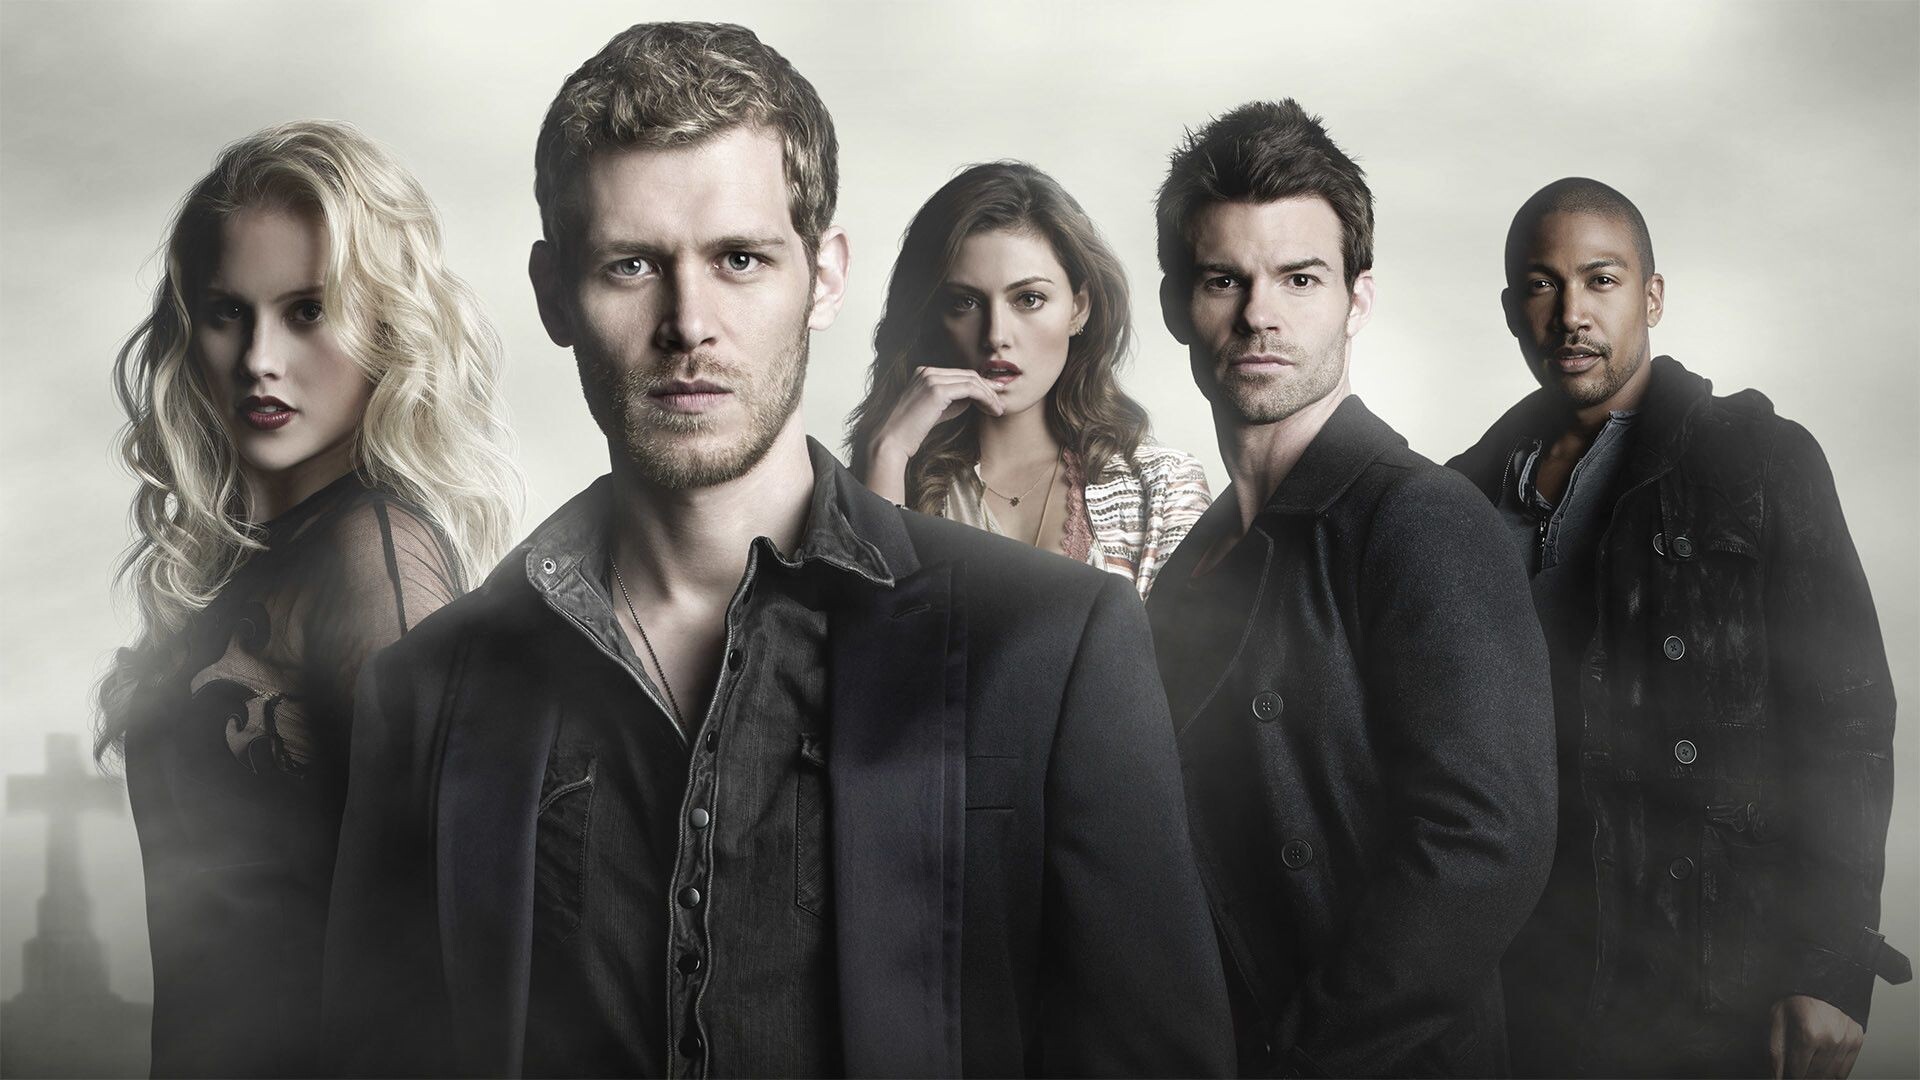 The Originals (TV Series): A family of power-hungry thousand-year-old vampires, Niklaus Mikaelson, Elijah Mikaelson. 1920x1080 Full HD Wallpaper.